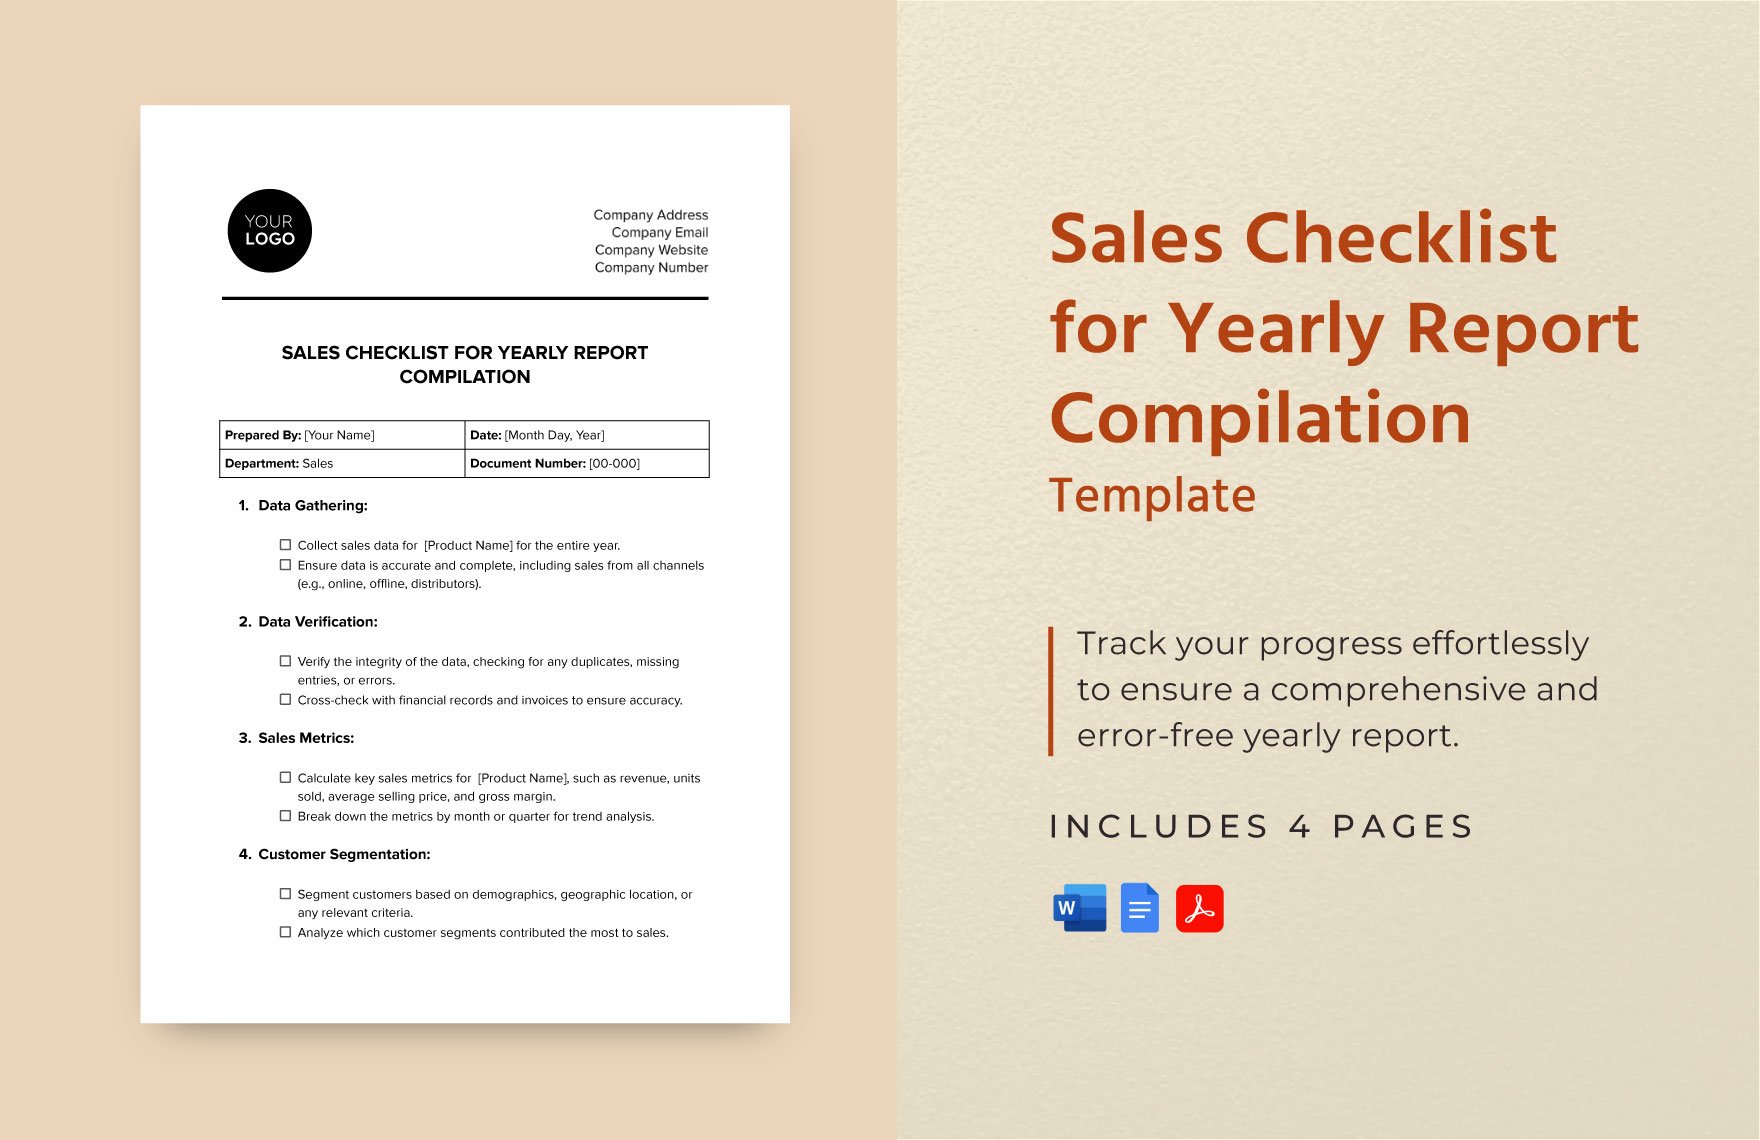 Sales Checklist for Yearly Report Compilation Template in Word, Google Docs, PDF